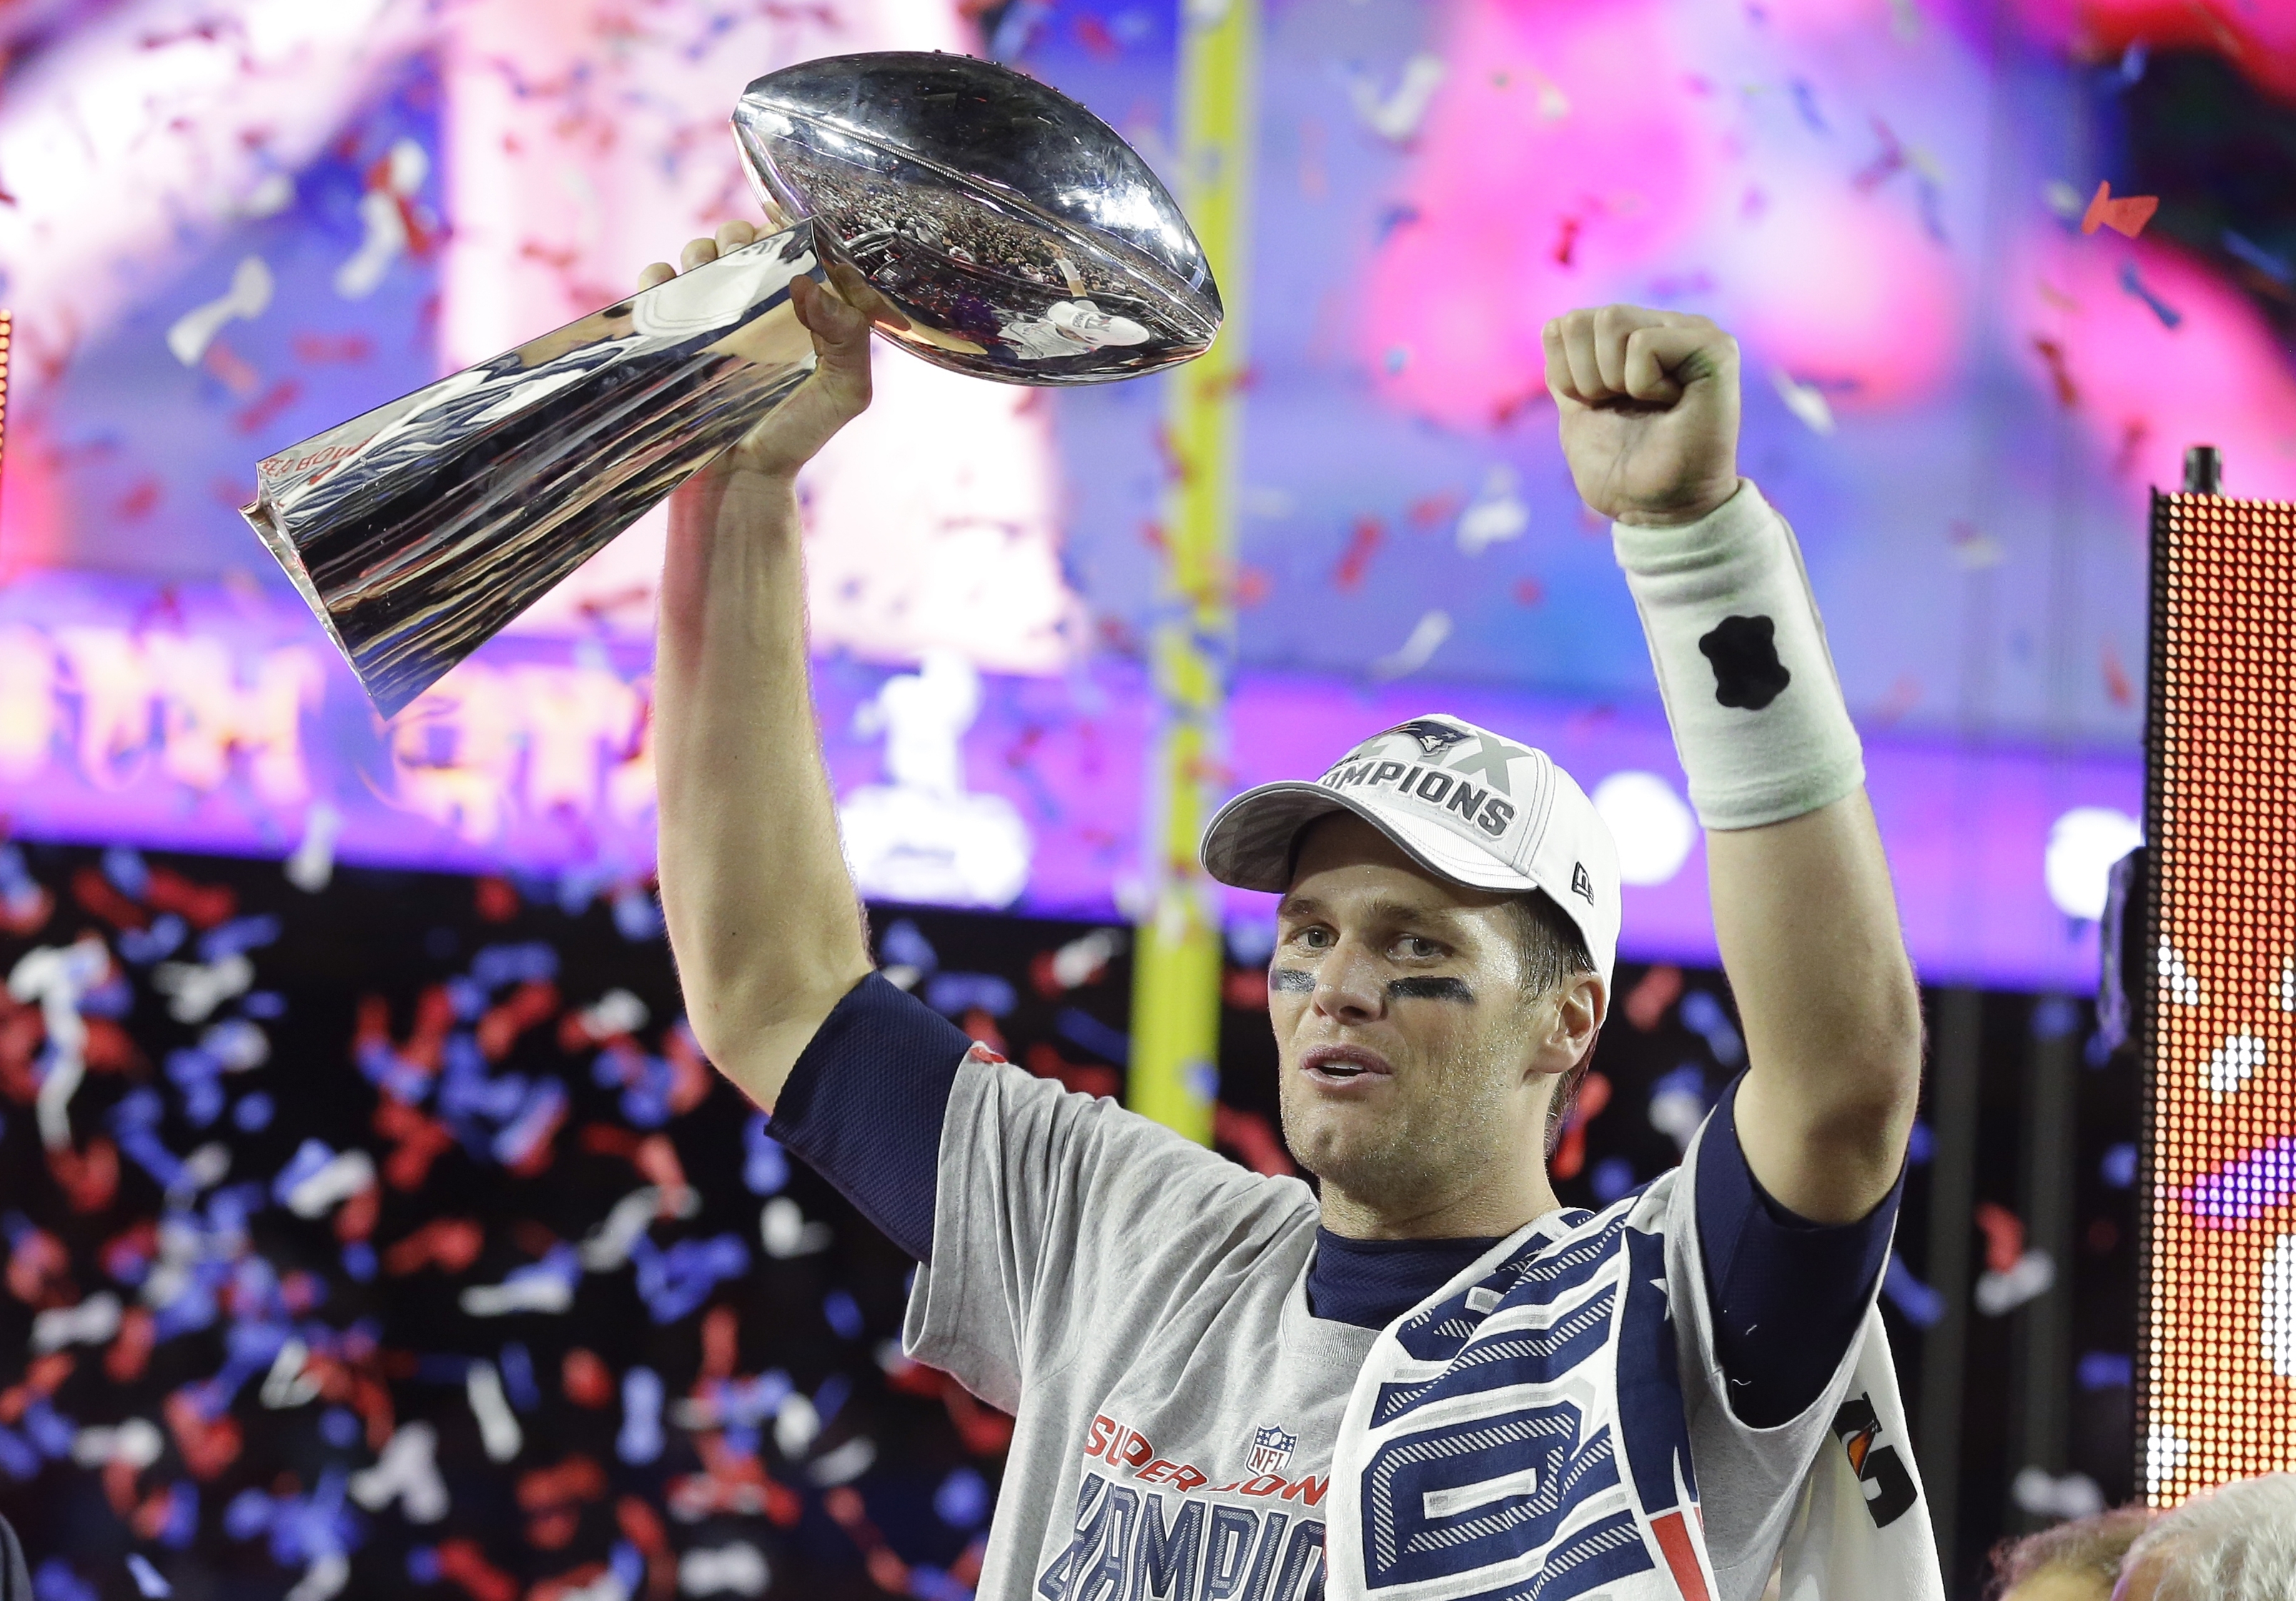 Brady Rallies Patriots To 28 24 Super Bowl Win Over Seahawks The